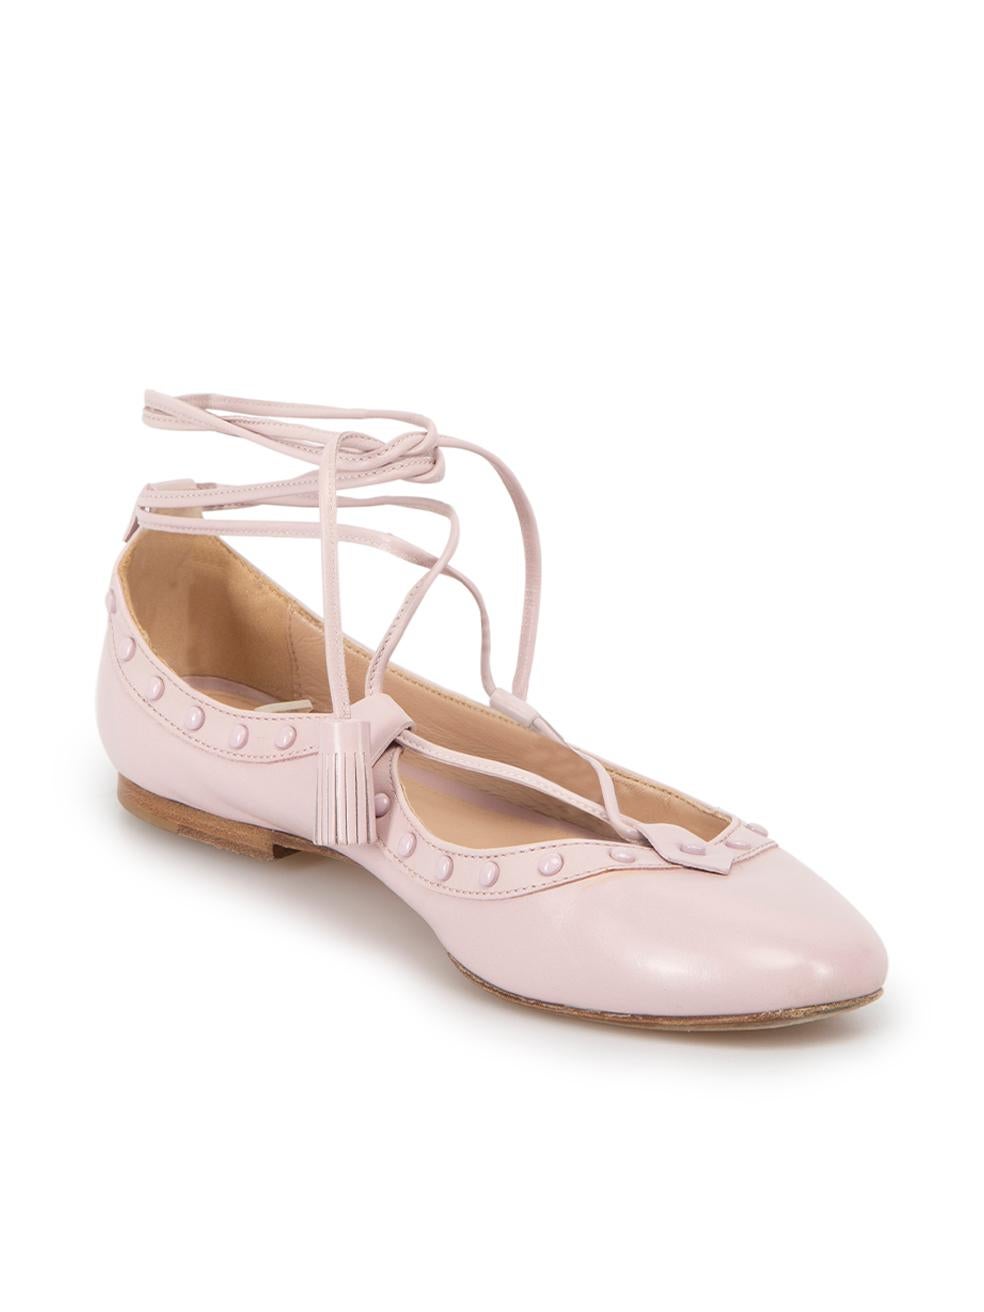 CONDITION is Very good. Minimal wear to shoes is evident. Minimal wear to both shoes with discoloured markings on this used Tod's designer resale item.



Details


Pink

Leather

Ballet flats

Stud accent

Round toe

Flat heel

Tie strap closure